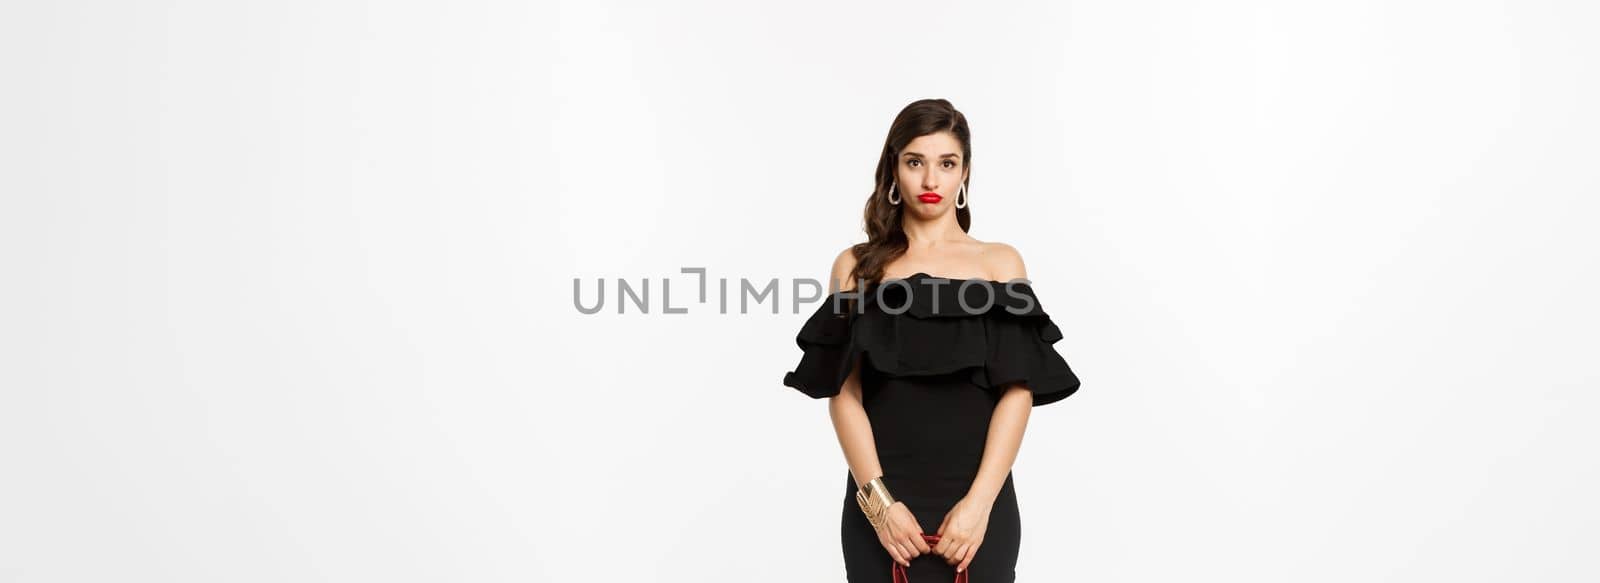 Beauty and fashion concept. Full length if silly young woman pouting and looking confused, holding purse, wearing heels and black dress, white background.